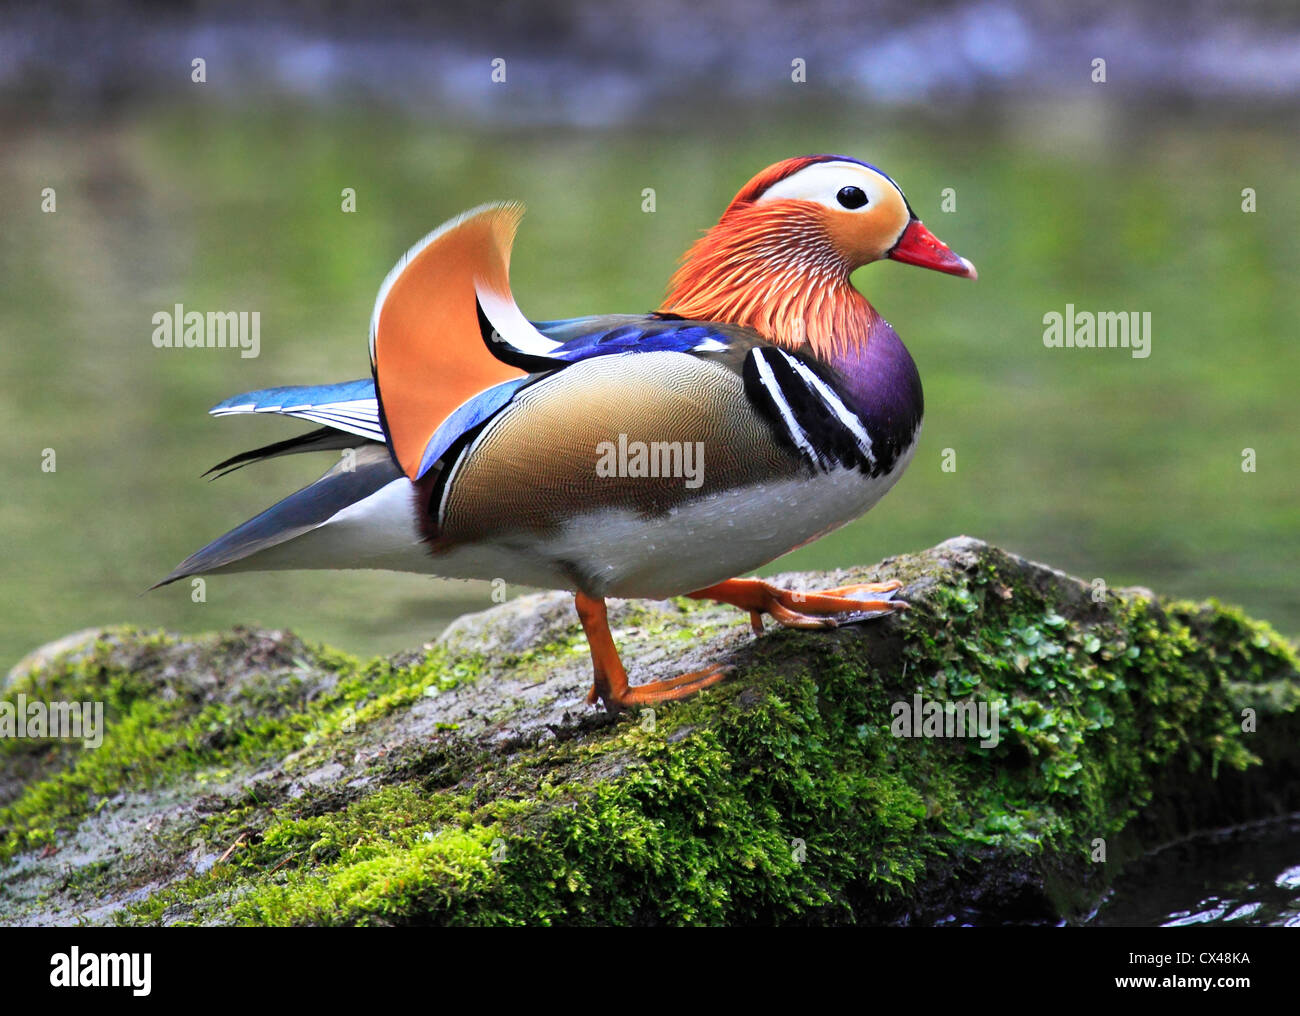 A wild male Mandarin (Aix galericulata) in the Wyre Forest, Worcestershire, England, Europe Stock Photo